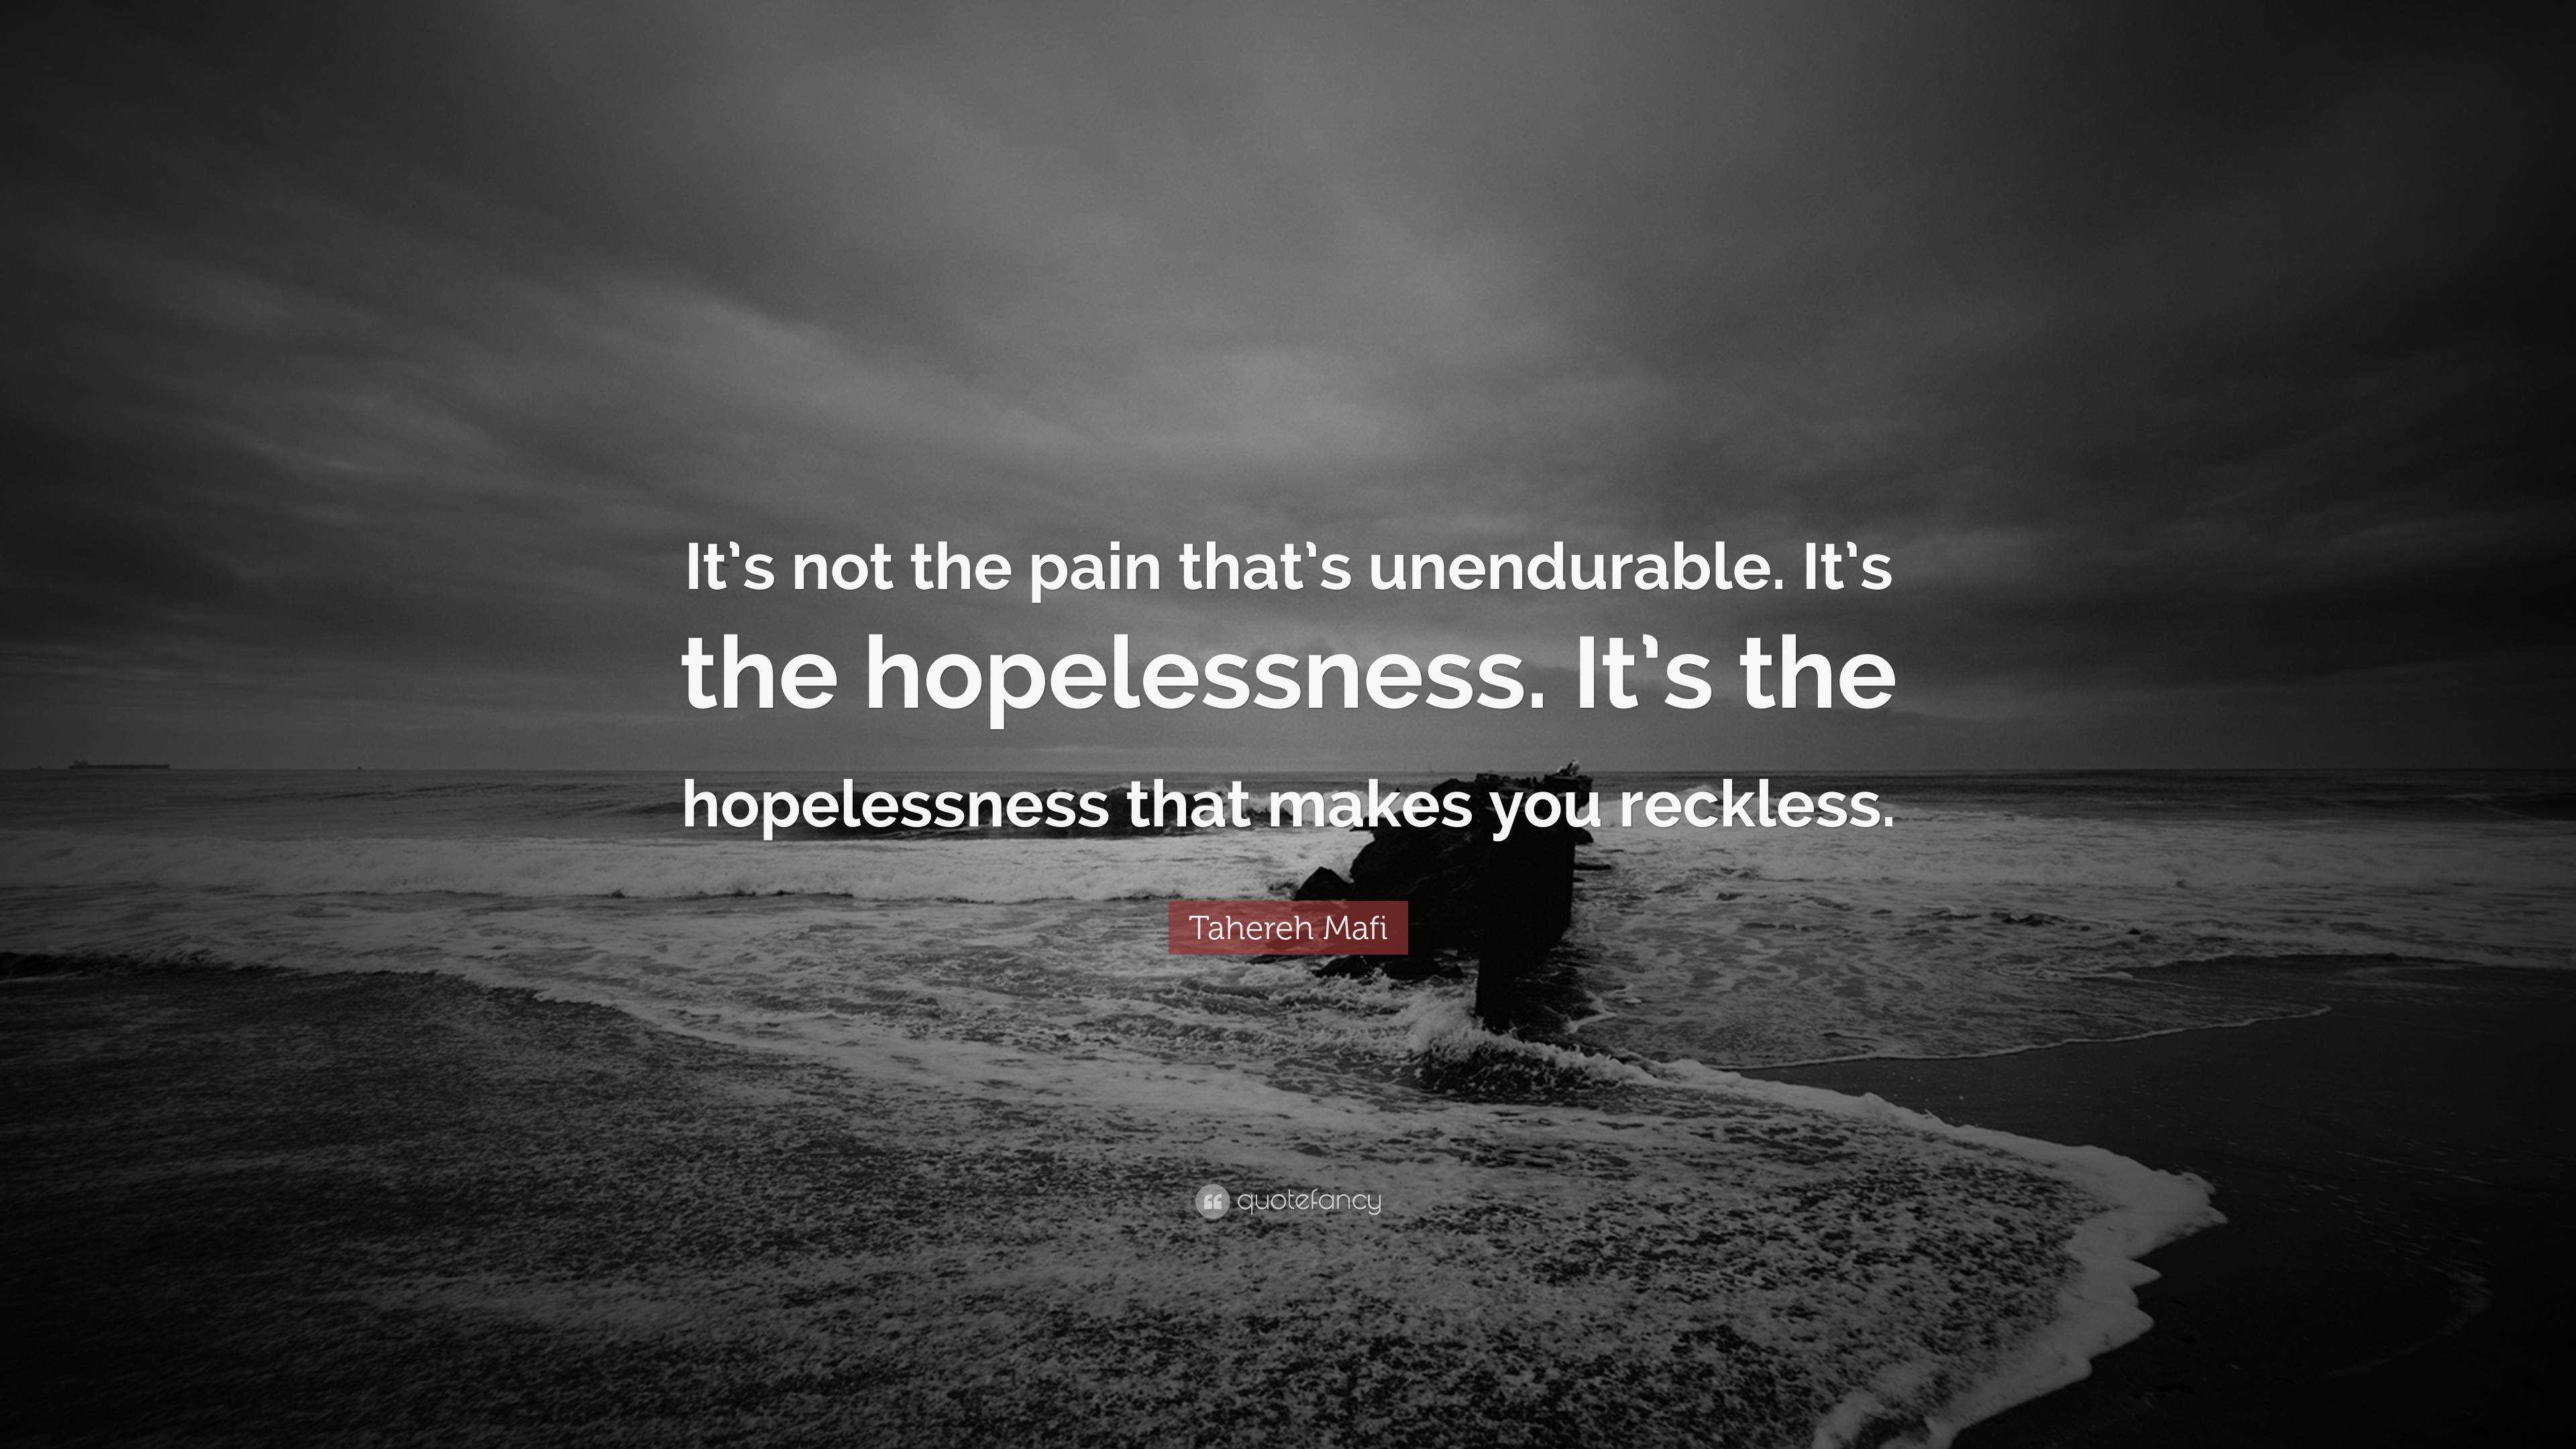 Tahereh Mafi Quote: “It’s not the pain that’s unendurable. It’s the ...